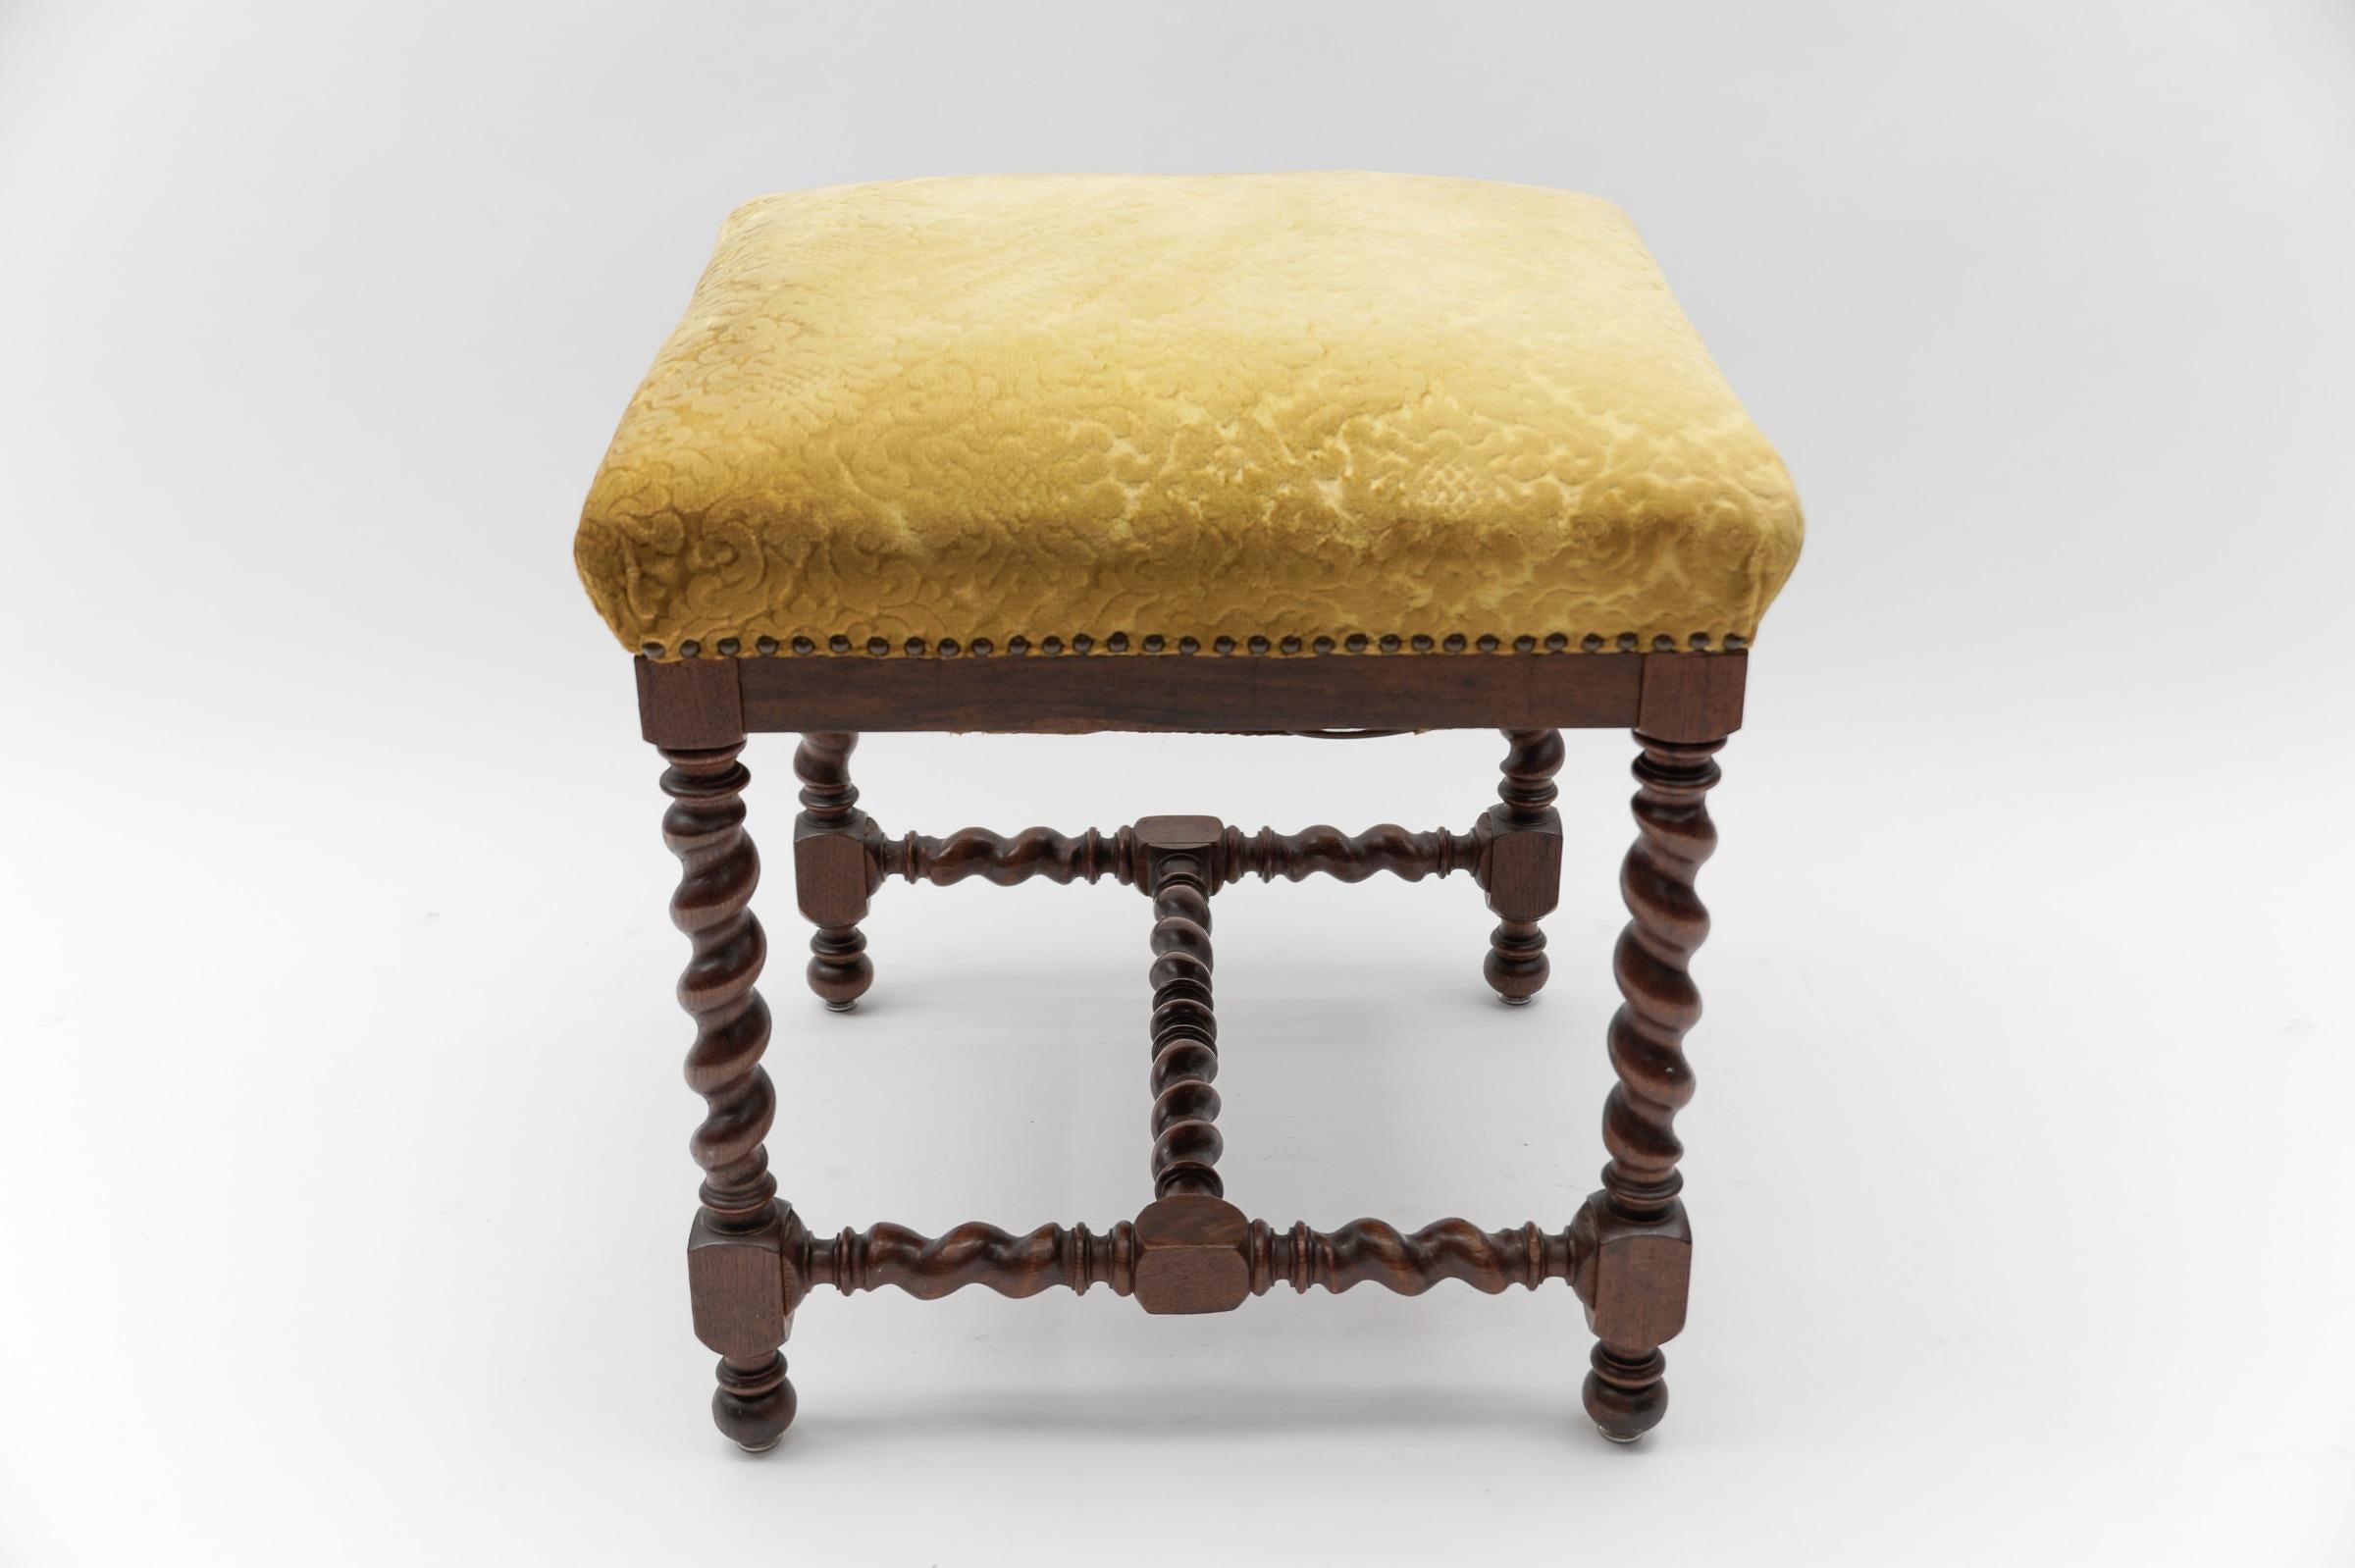 Two French Barley Wood Stools in Louis XIII Style, ca. 1870s For Sale 3